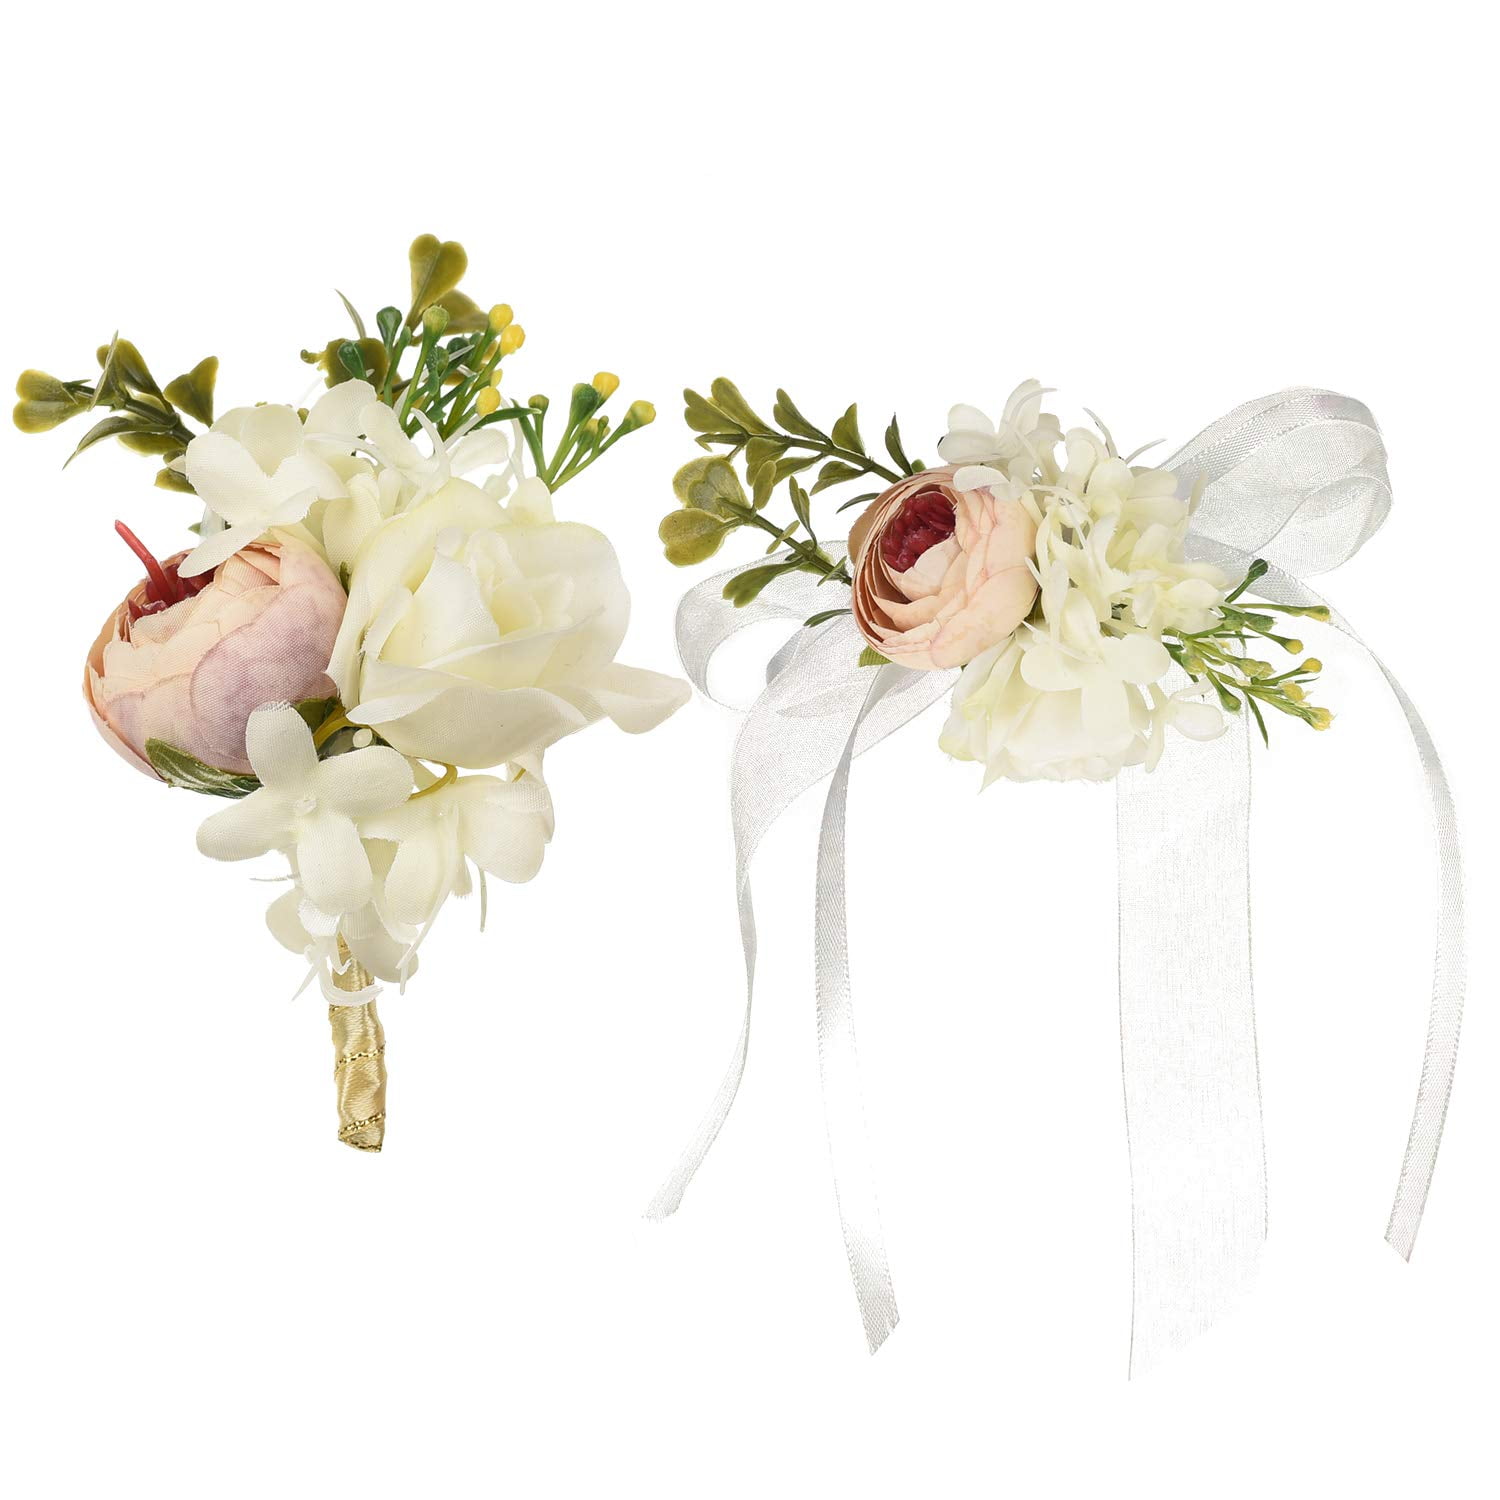 For Bridal Bouquet Wedding Corsage for Groom or Best 